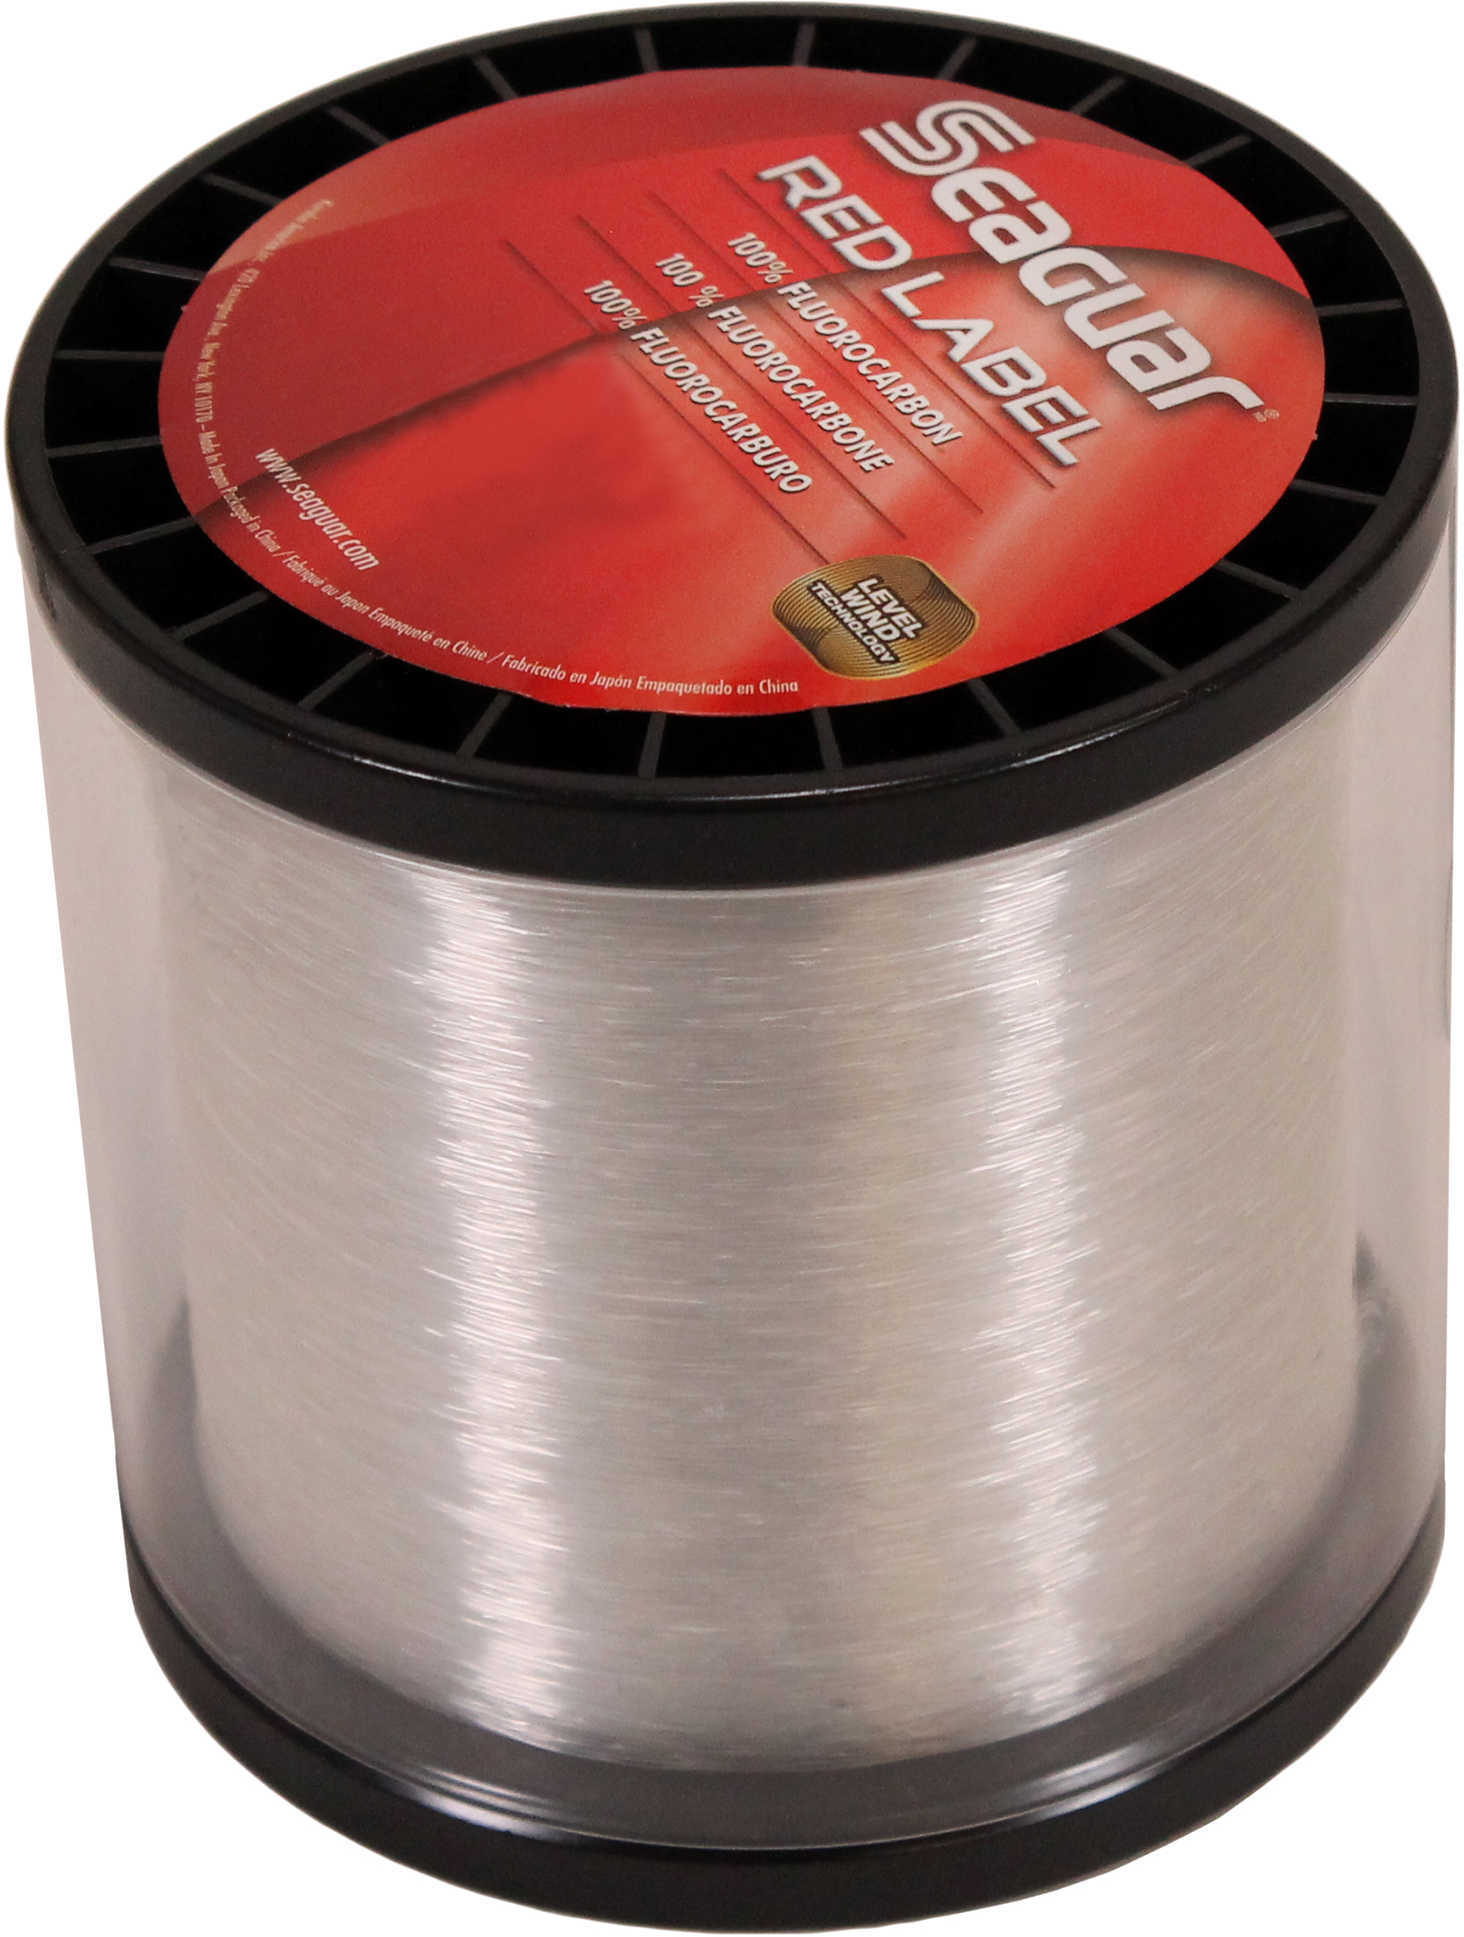 Seaguar Red Label Fluorocarbon Clear 1000yds 10Lb Fishing Line